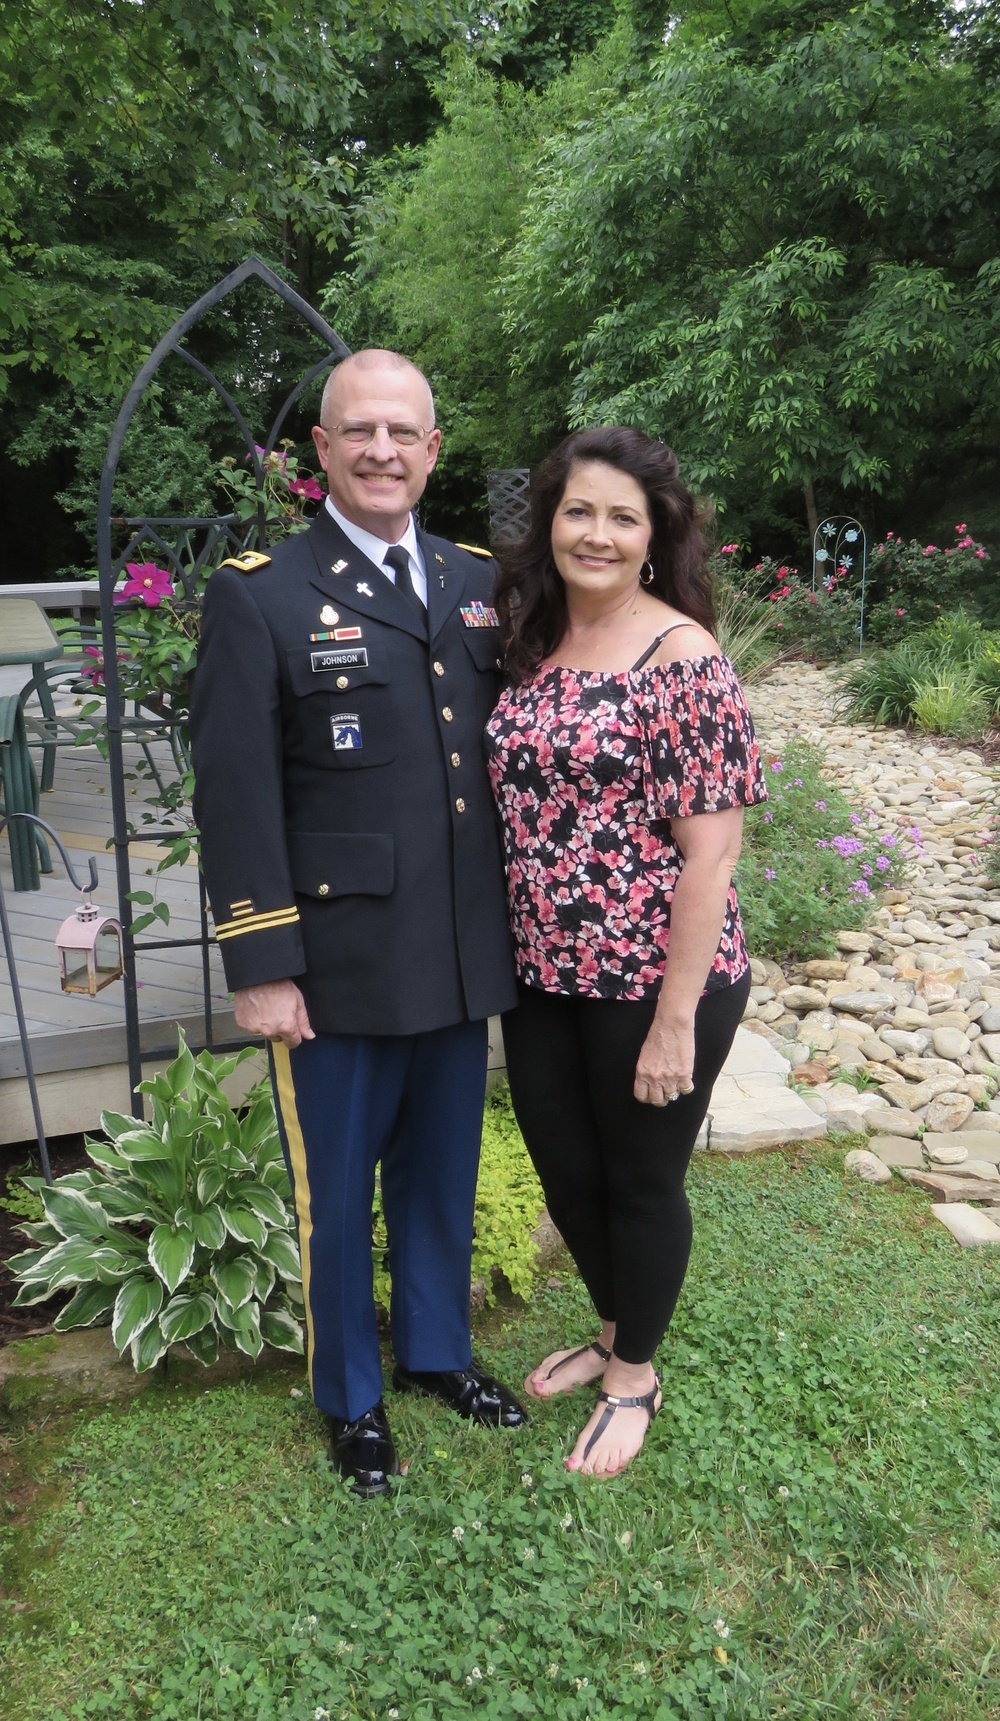 Chaplain “coming home” to South Carolina after 20 years of military service